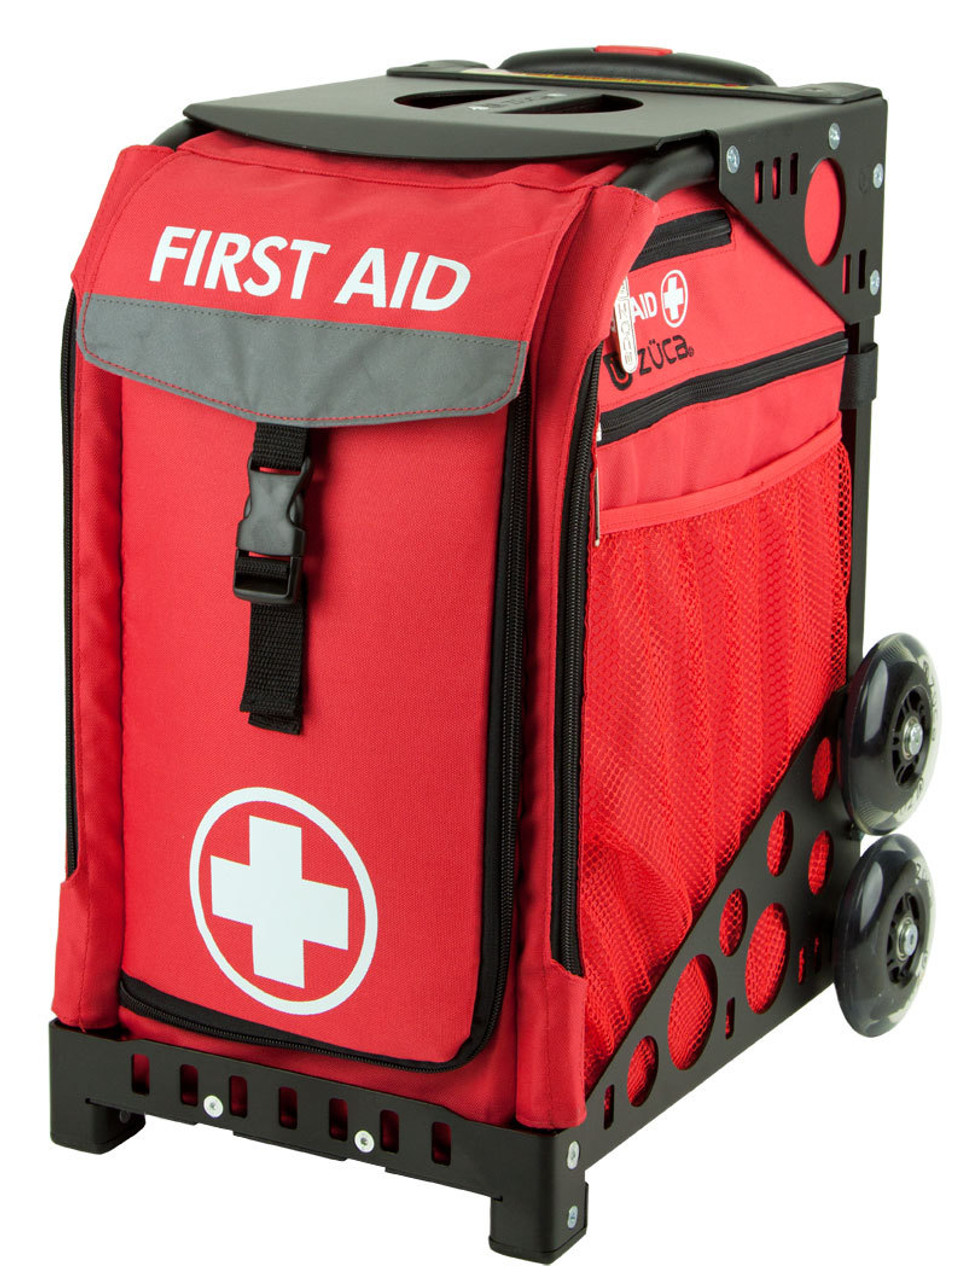 First aid doctor's bag - DOCTOR'S - ELITE BAGS - handle